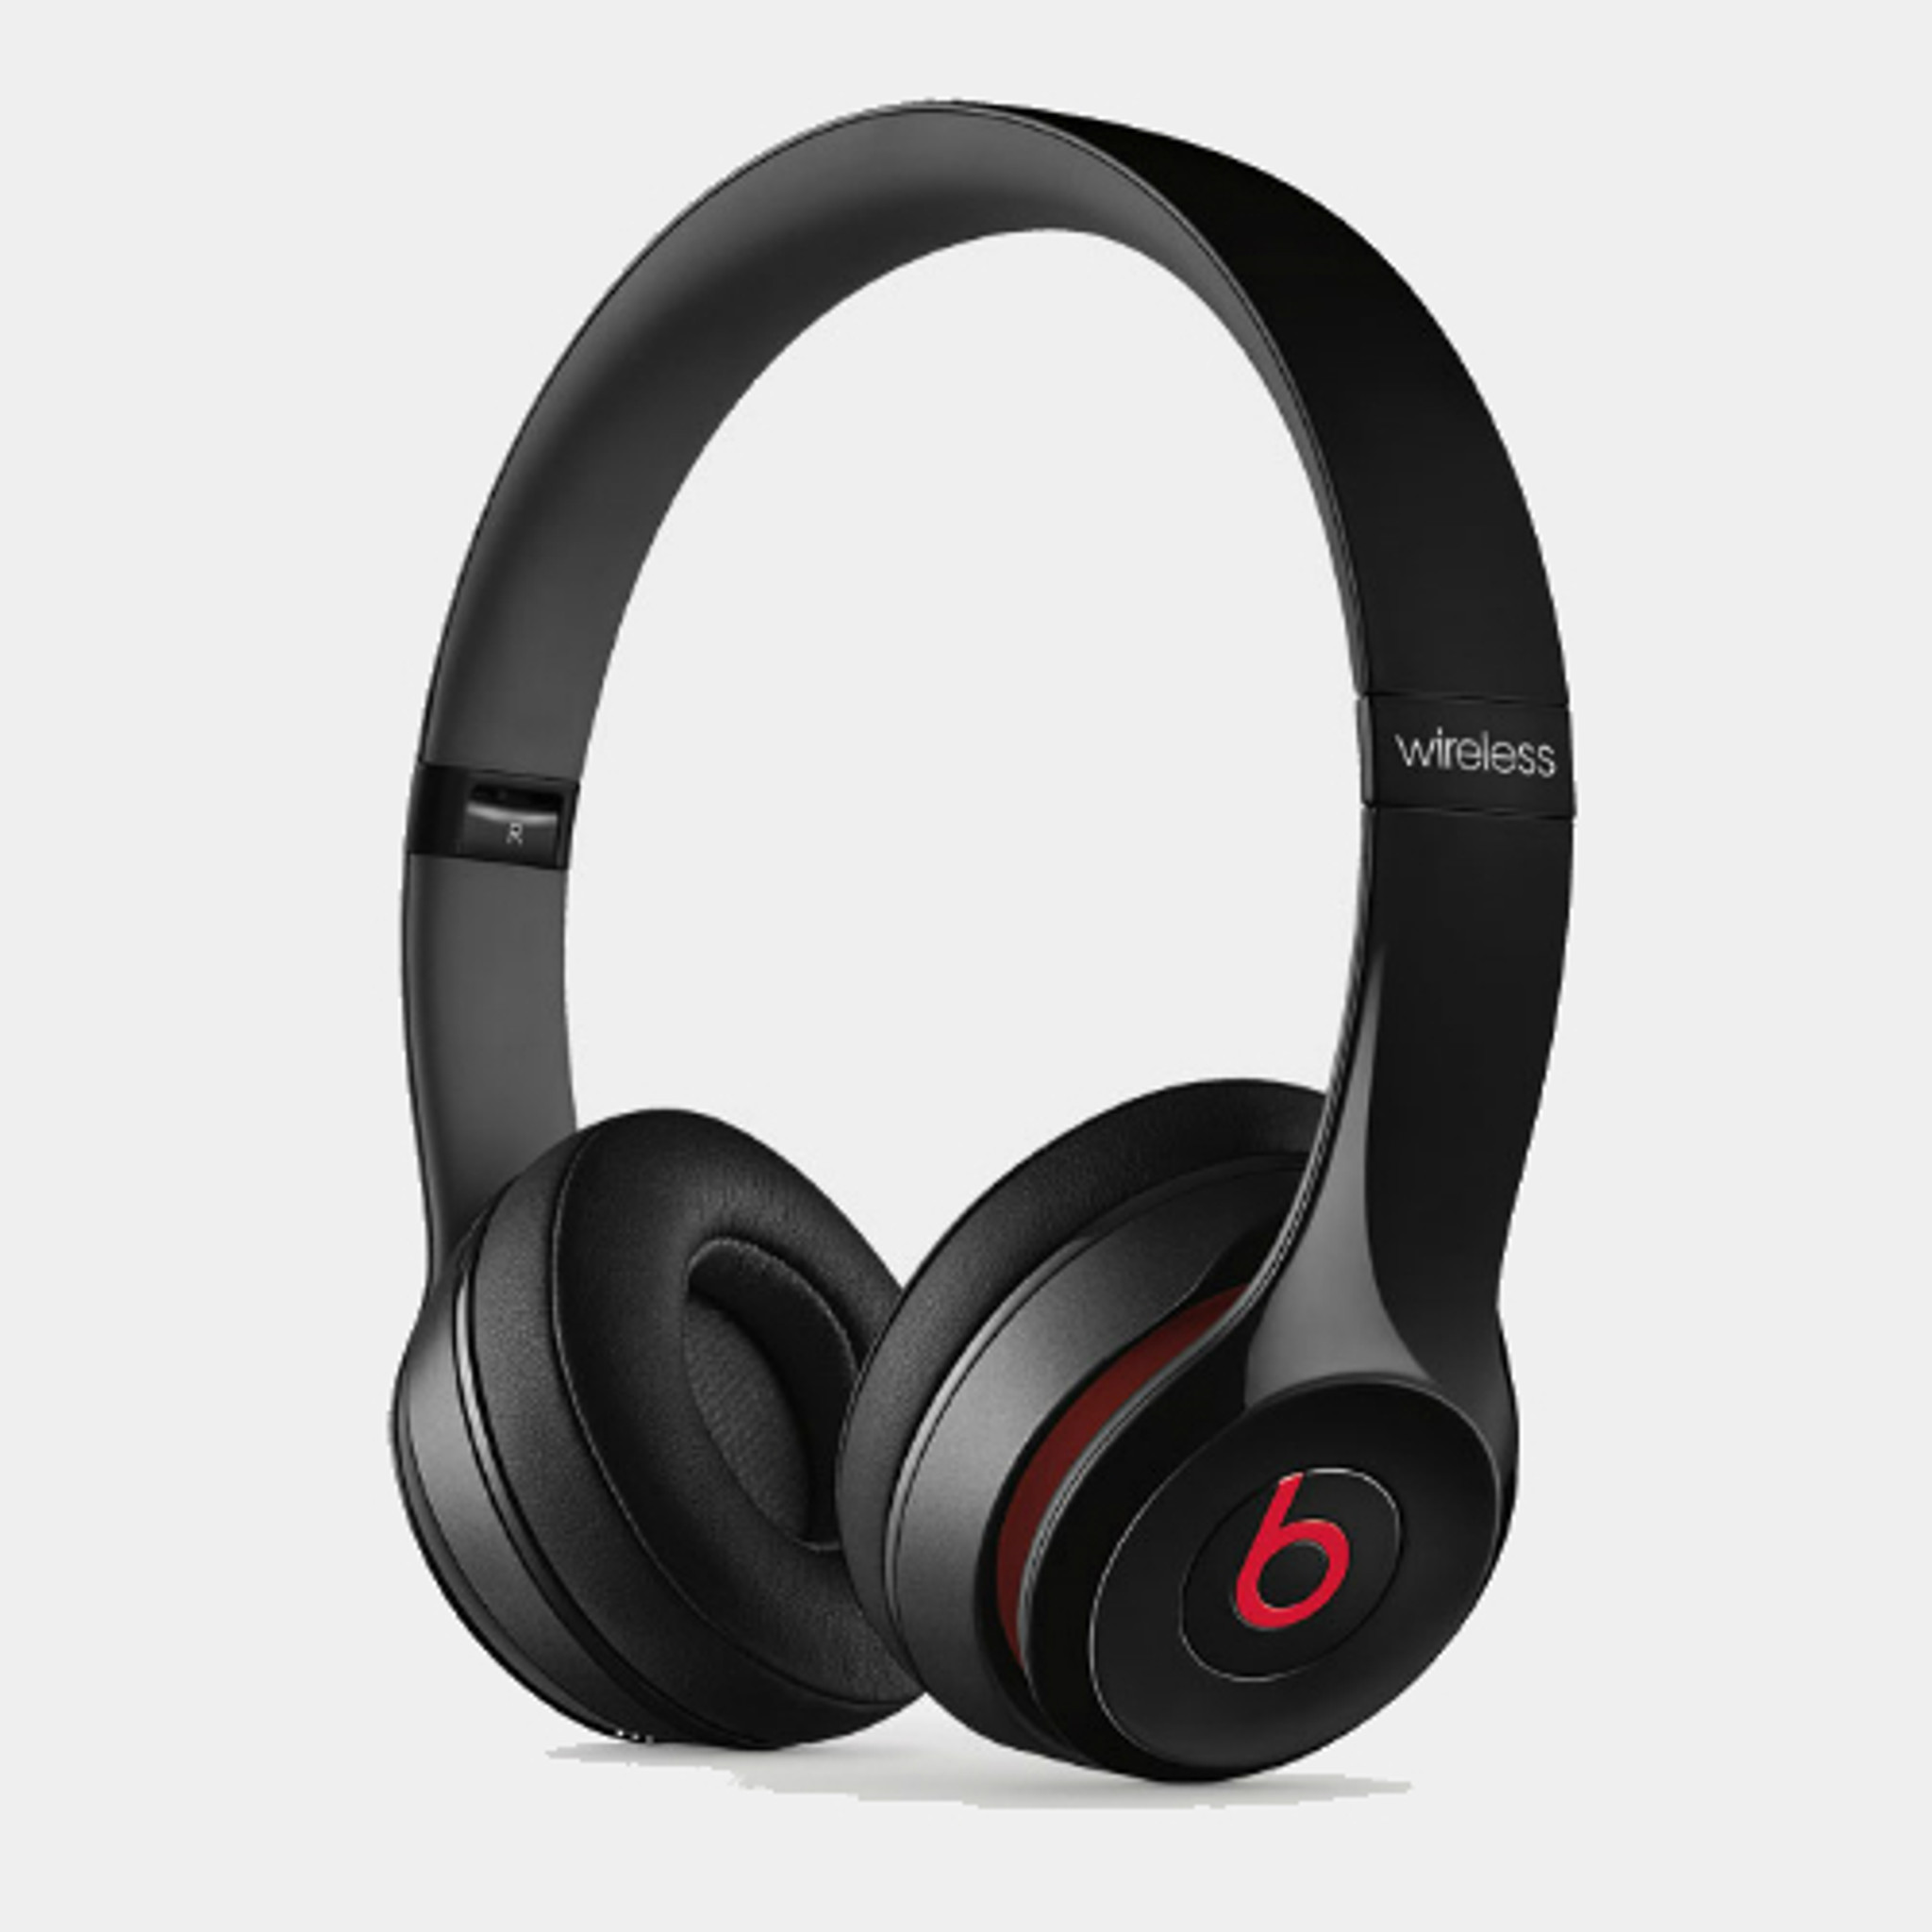 Beats Solo2 Wireless - The Wireless Age (a Division Wireless Communications Ltd.)